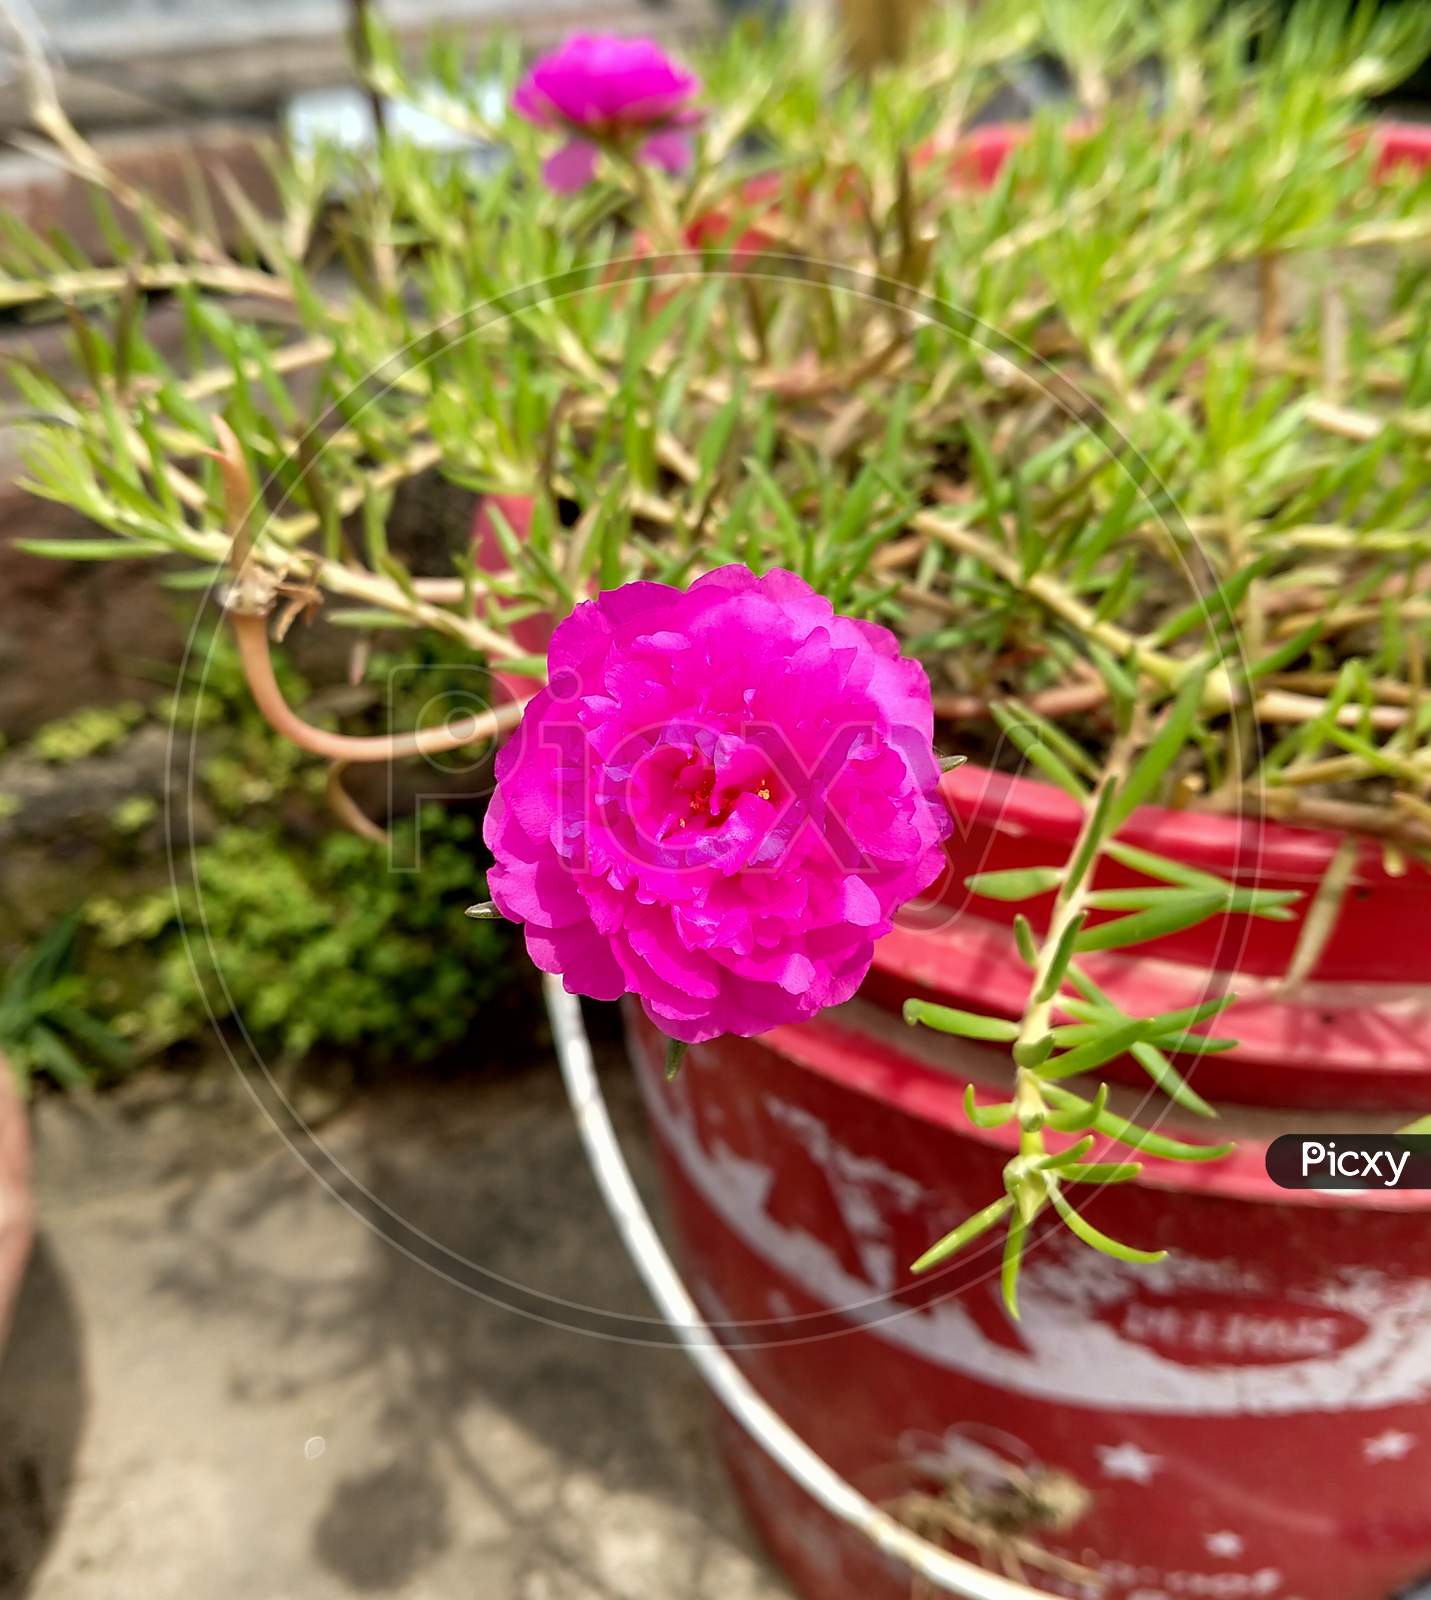 A Pink Portulaca Grandiflora Commonly Known As Moss Rose Blooming In A Tub With Blurry Background